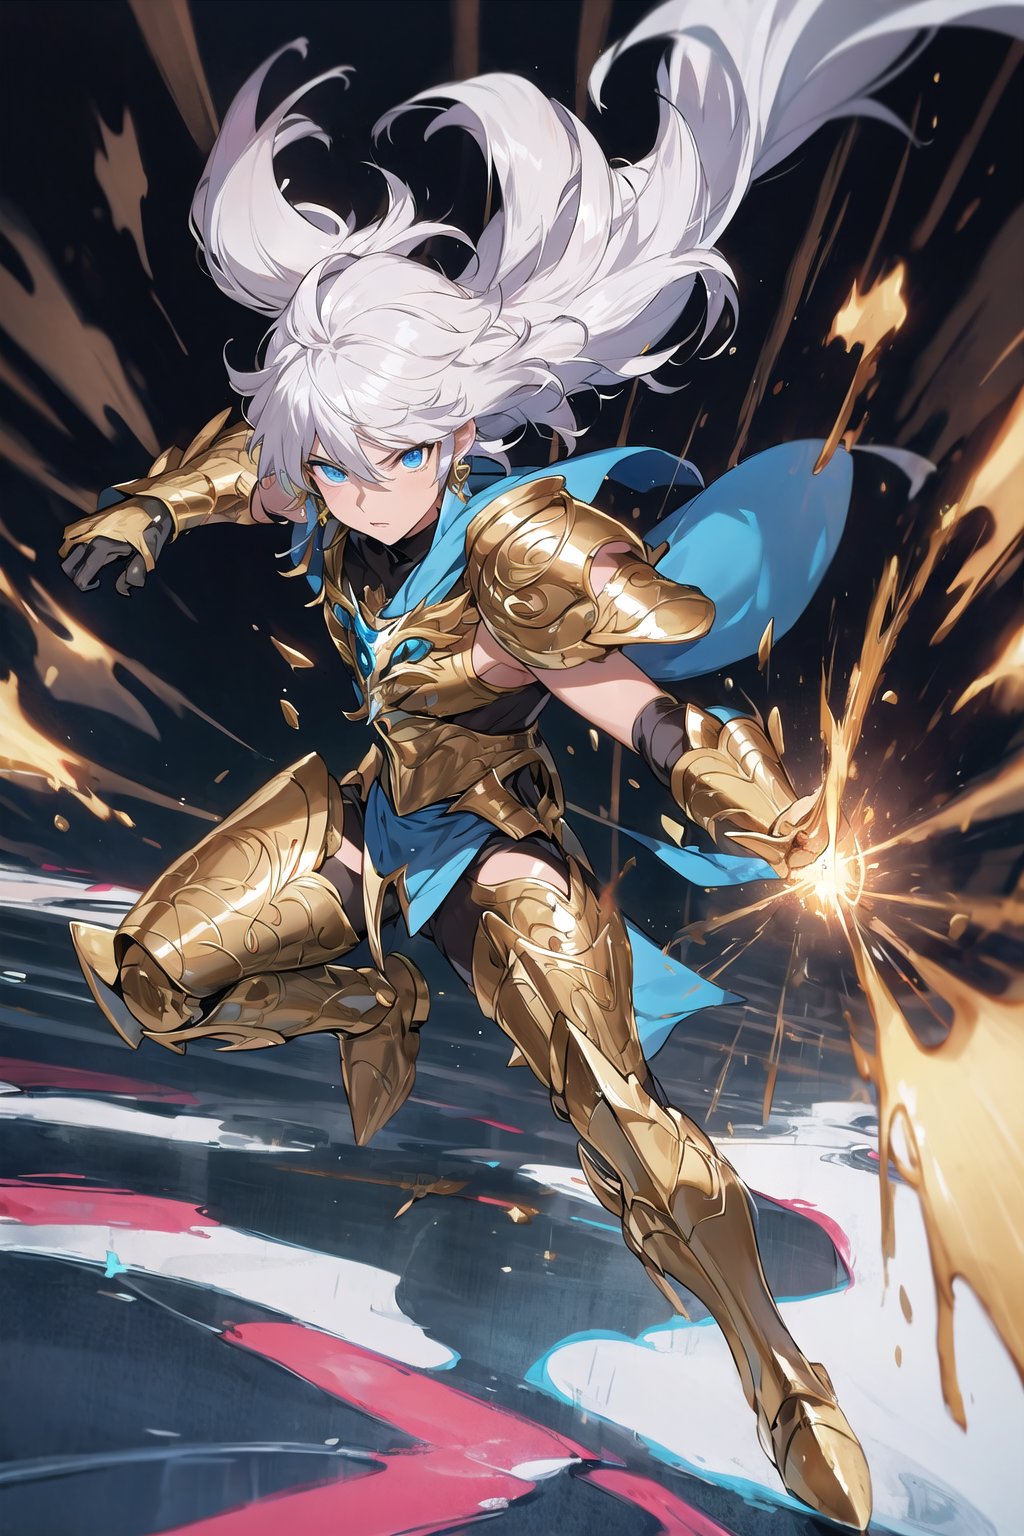 absurdres, highres, ultra detailed,Insane detail in face,  (boy:1.3), Gold Saint, Saint Seiya Style, paint splatter, expressive drips, random patterns, energetic movement, bold colors, dynamic texture, spontaneous creativity, Gold Armor, Full body armor, no helmet, Zodiac Knights, White long cape, white hair, Fighting pose,Pokemon Gotcha Style, gold gloves, long hair